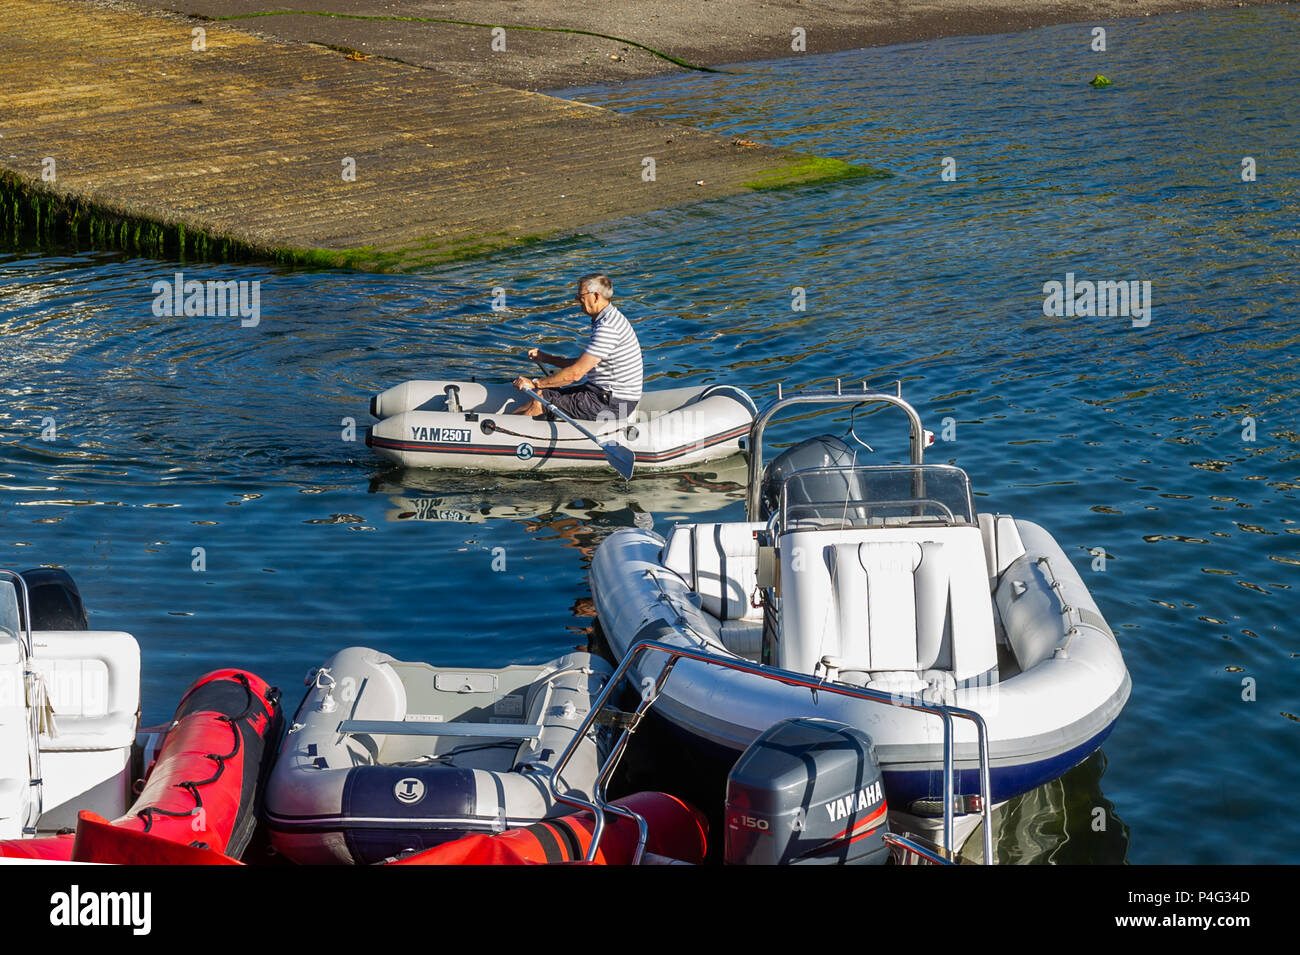 Schull, Ireland. 22nd June, 2018. A boater rows out to his boat in Schull Harbour to spend the day boating in and around Schull. Temperatures will rise over the coming days, reaching the mid-20's celsius by the middle of next week. Credit: Andy Gibson/Alamy Live News. Stock Photo